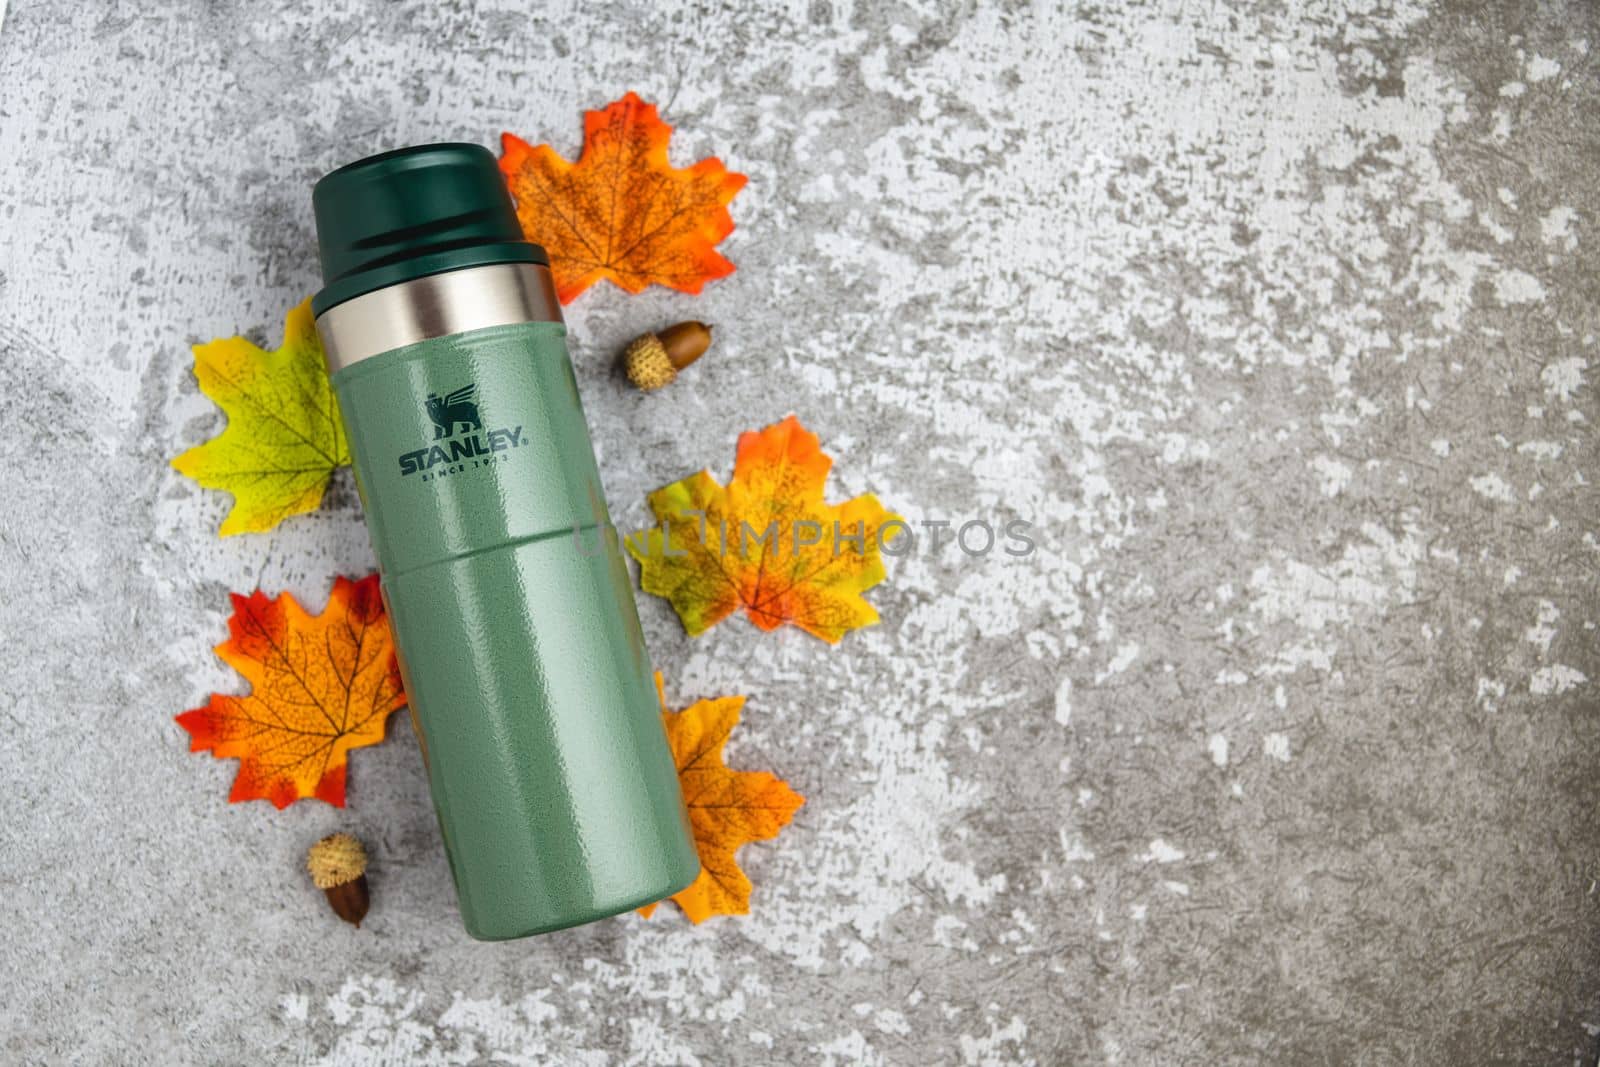 Antalya, Turkey - November 28, 2022: Stanley Action Trigger thermos mug with leaves in autumn colors on stone background by Sonat